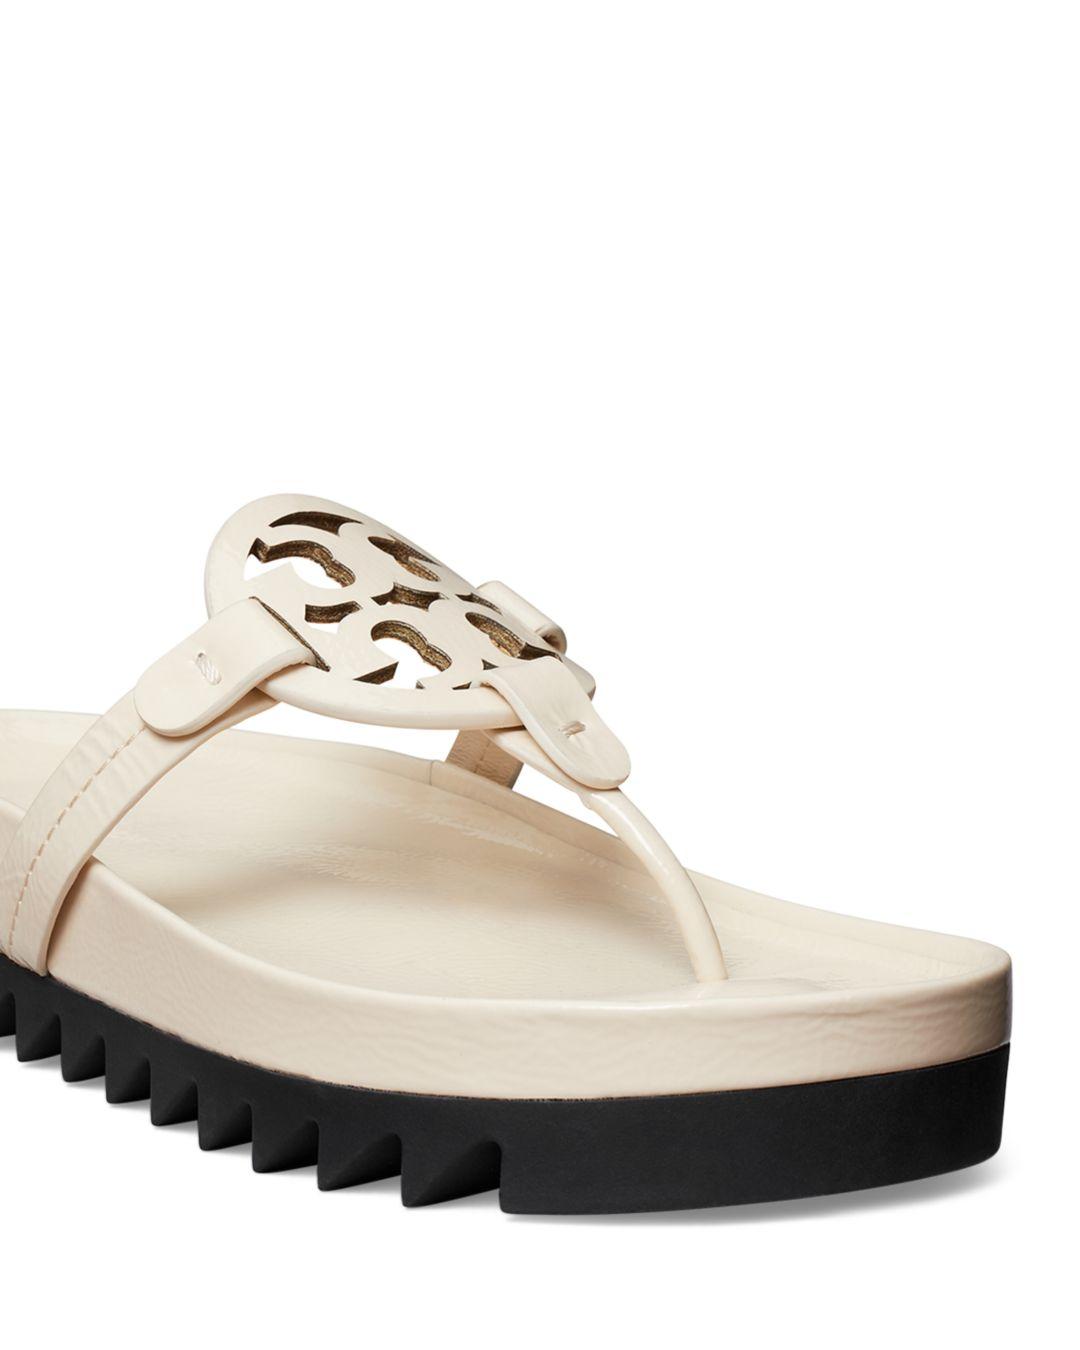 Tory Burch Miller Cloud Lug Thong Sandals in White | Lyst